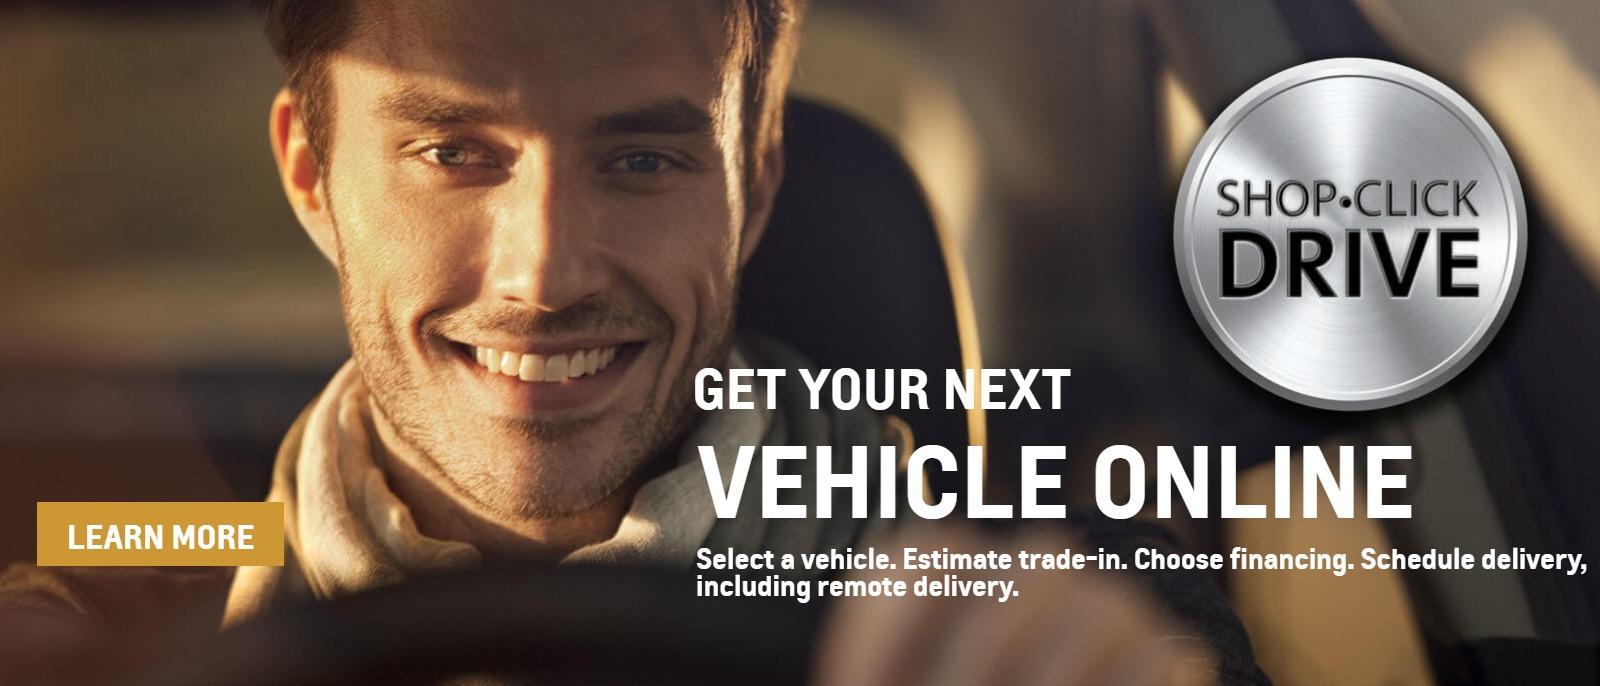 Shop. Click. Drive. - Get your next vehicle online. Select a vehicle. Estimate trade-in. Choose financing. Schedule delivery, including remote delivery.